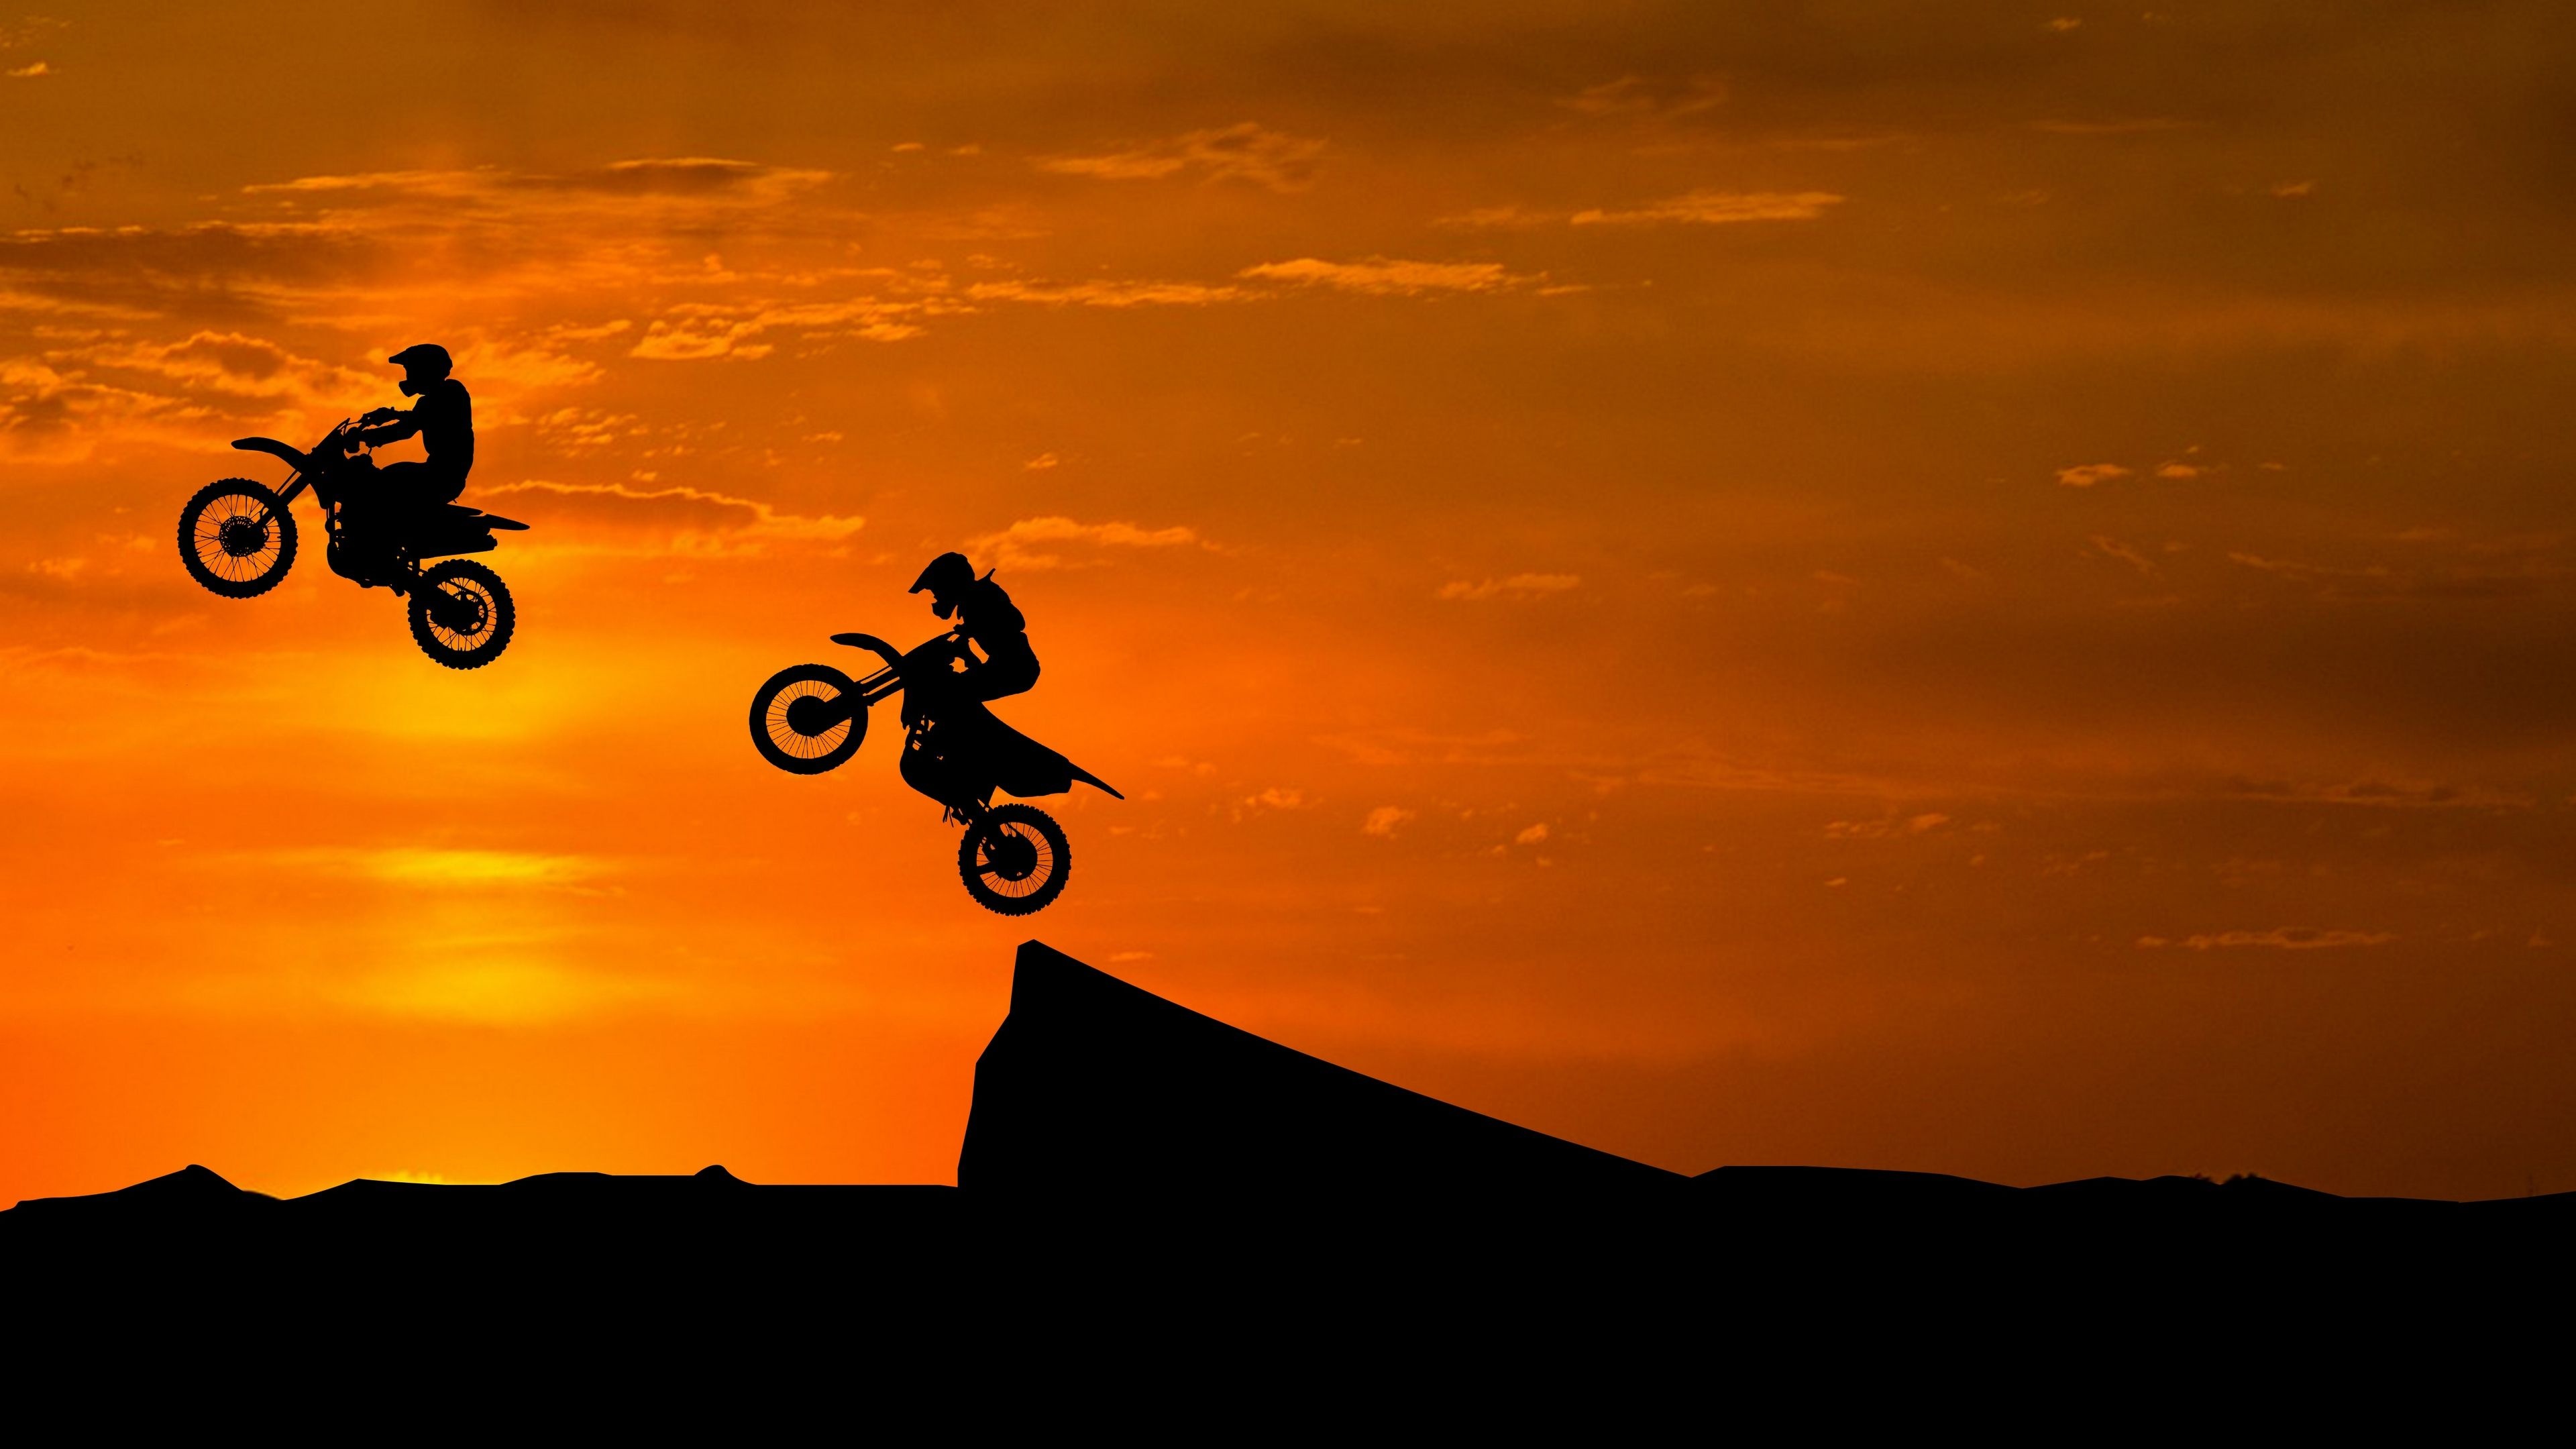 Stunt: Motocross in a group, Risky sport on dirt bikes, Motorcycle stunt riding. 3840x2160 4K Background.